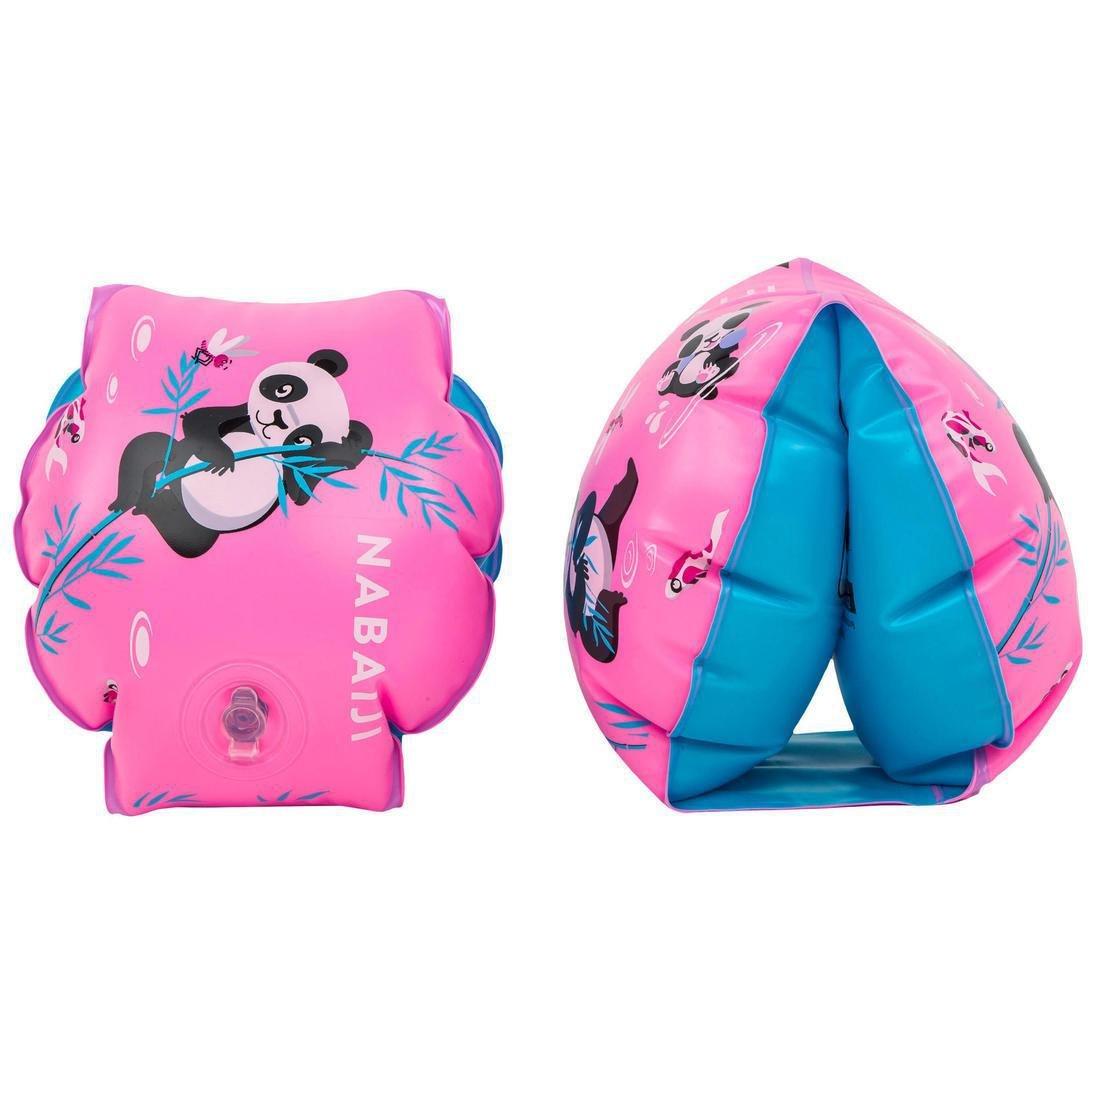 NABAIJI - Swimming armbands for kids with PANDAS?�€?? print - 11-30 kg, Fluo lime